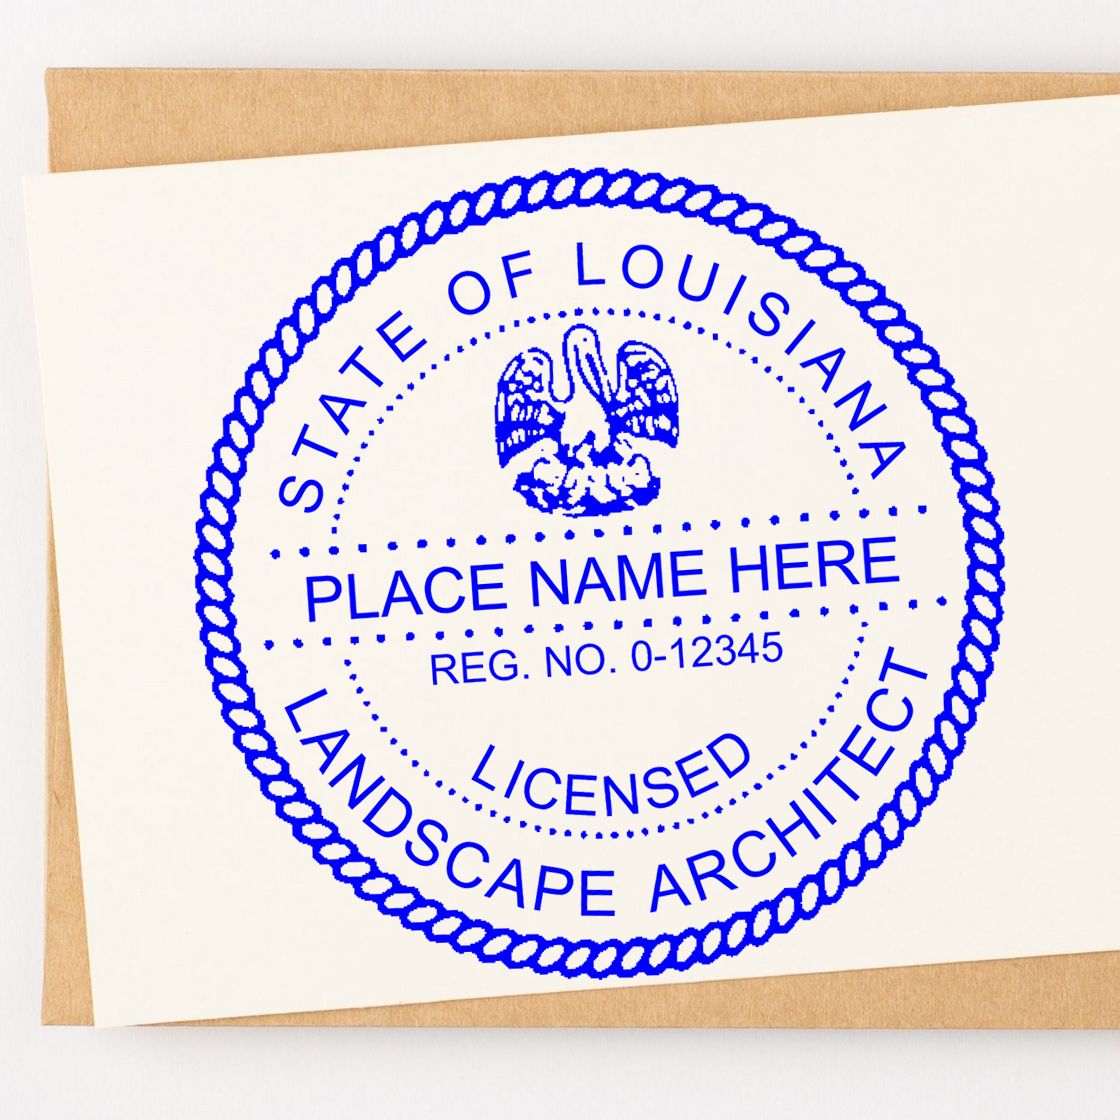 The Digital Louisiana Landscape Architect Stamp stamp impression comes to life with a crisp, detailed photo on paper - showcasing true professional quality.